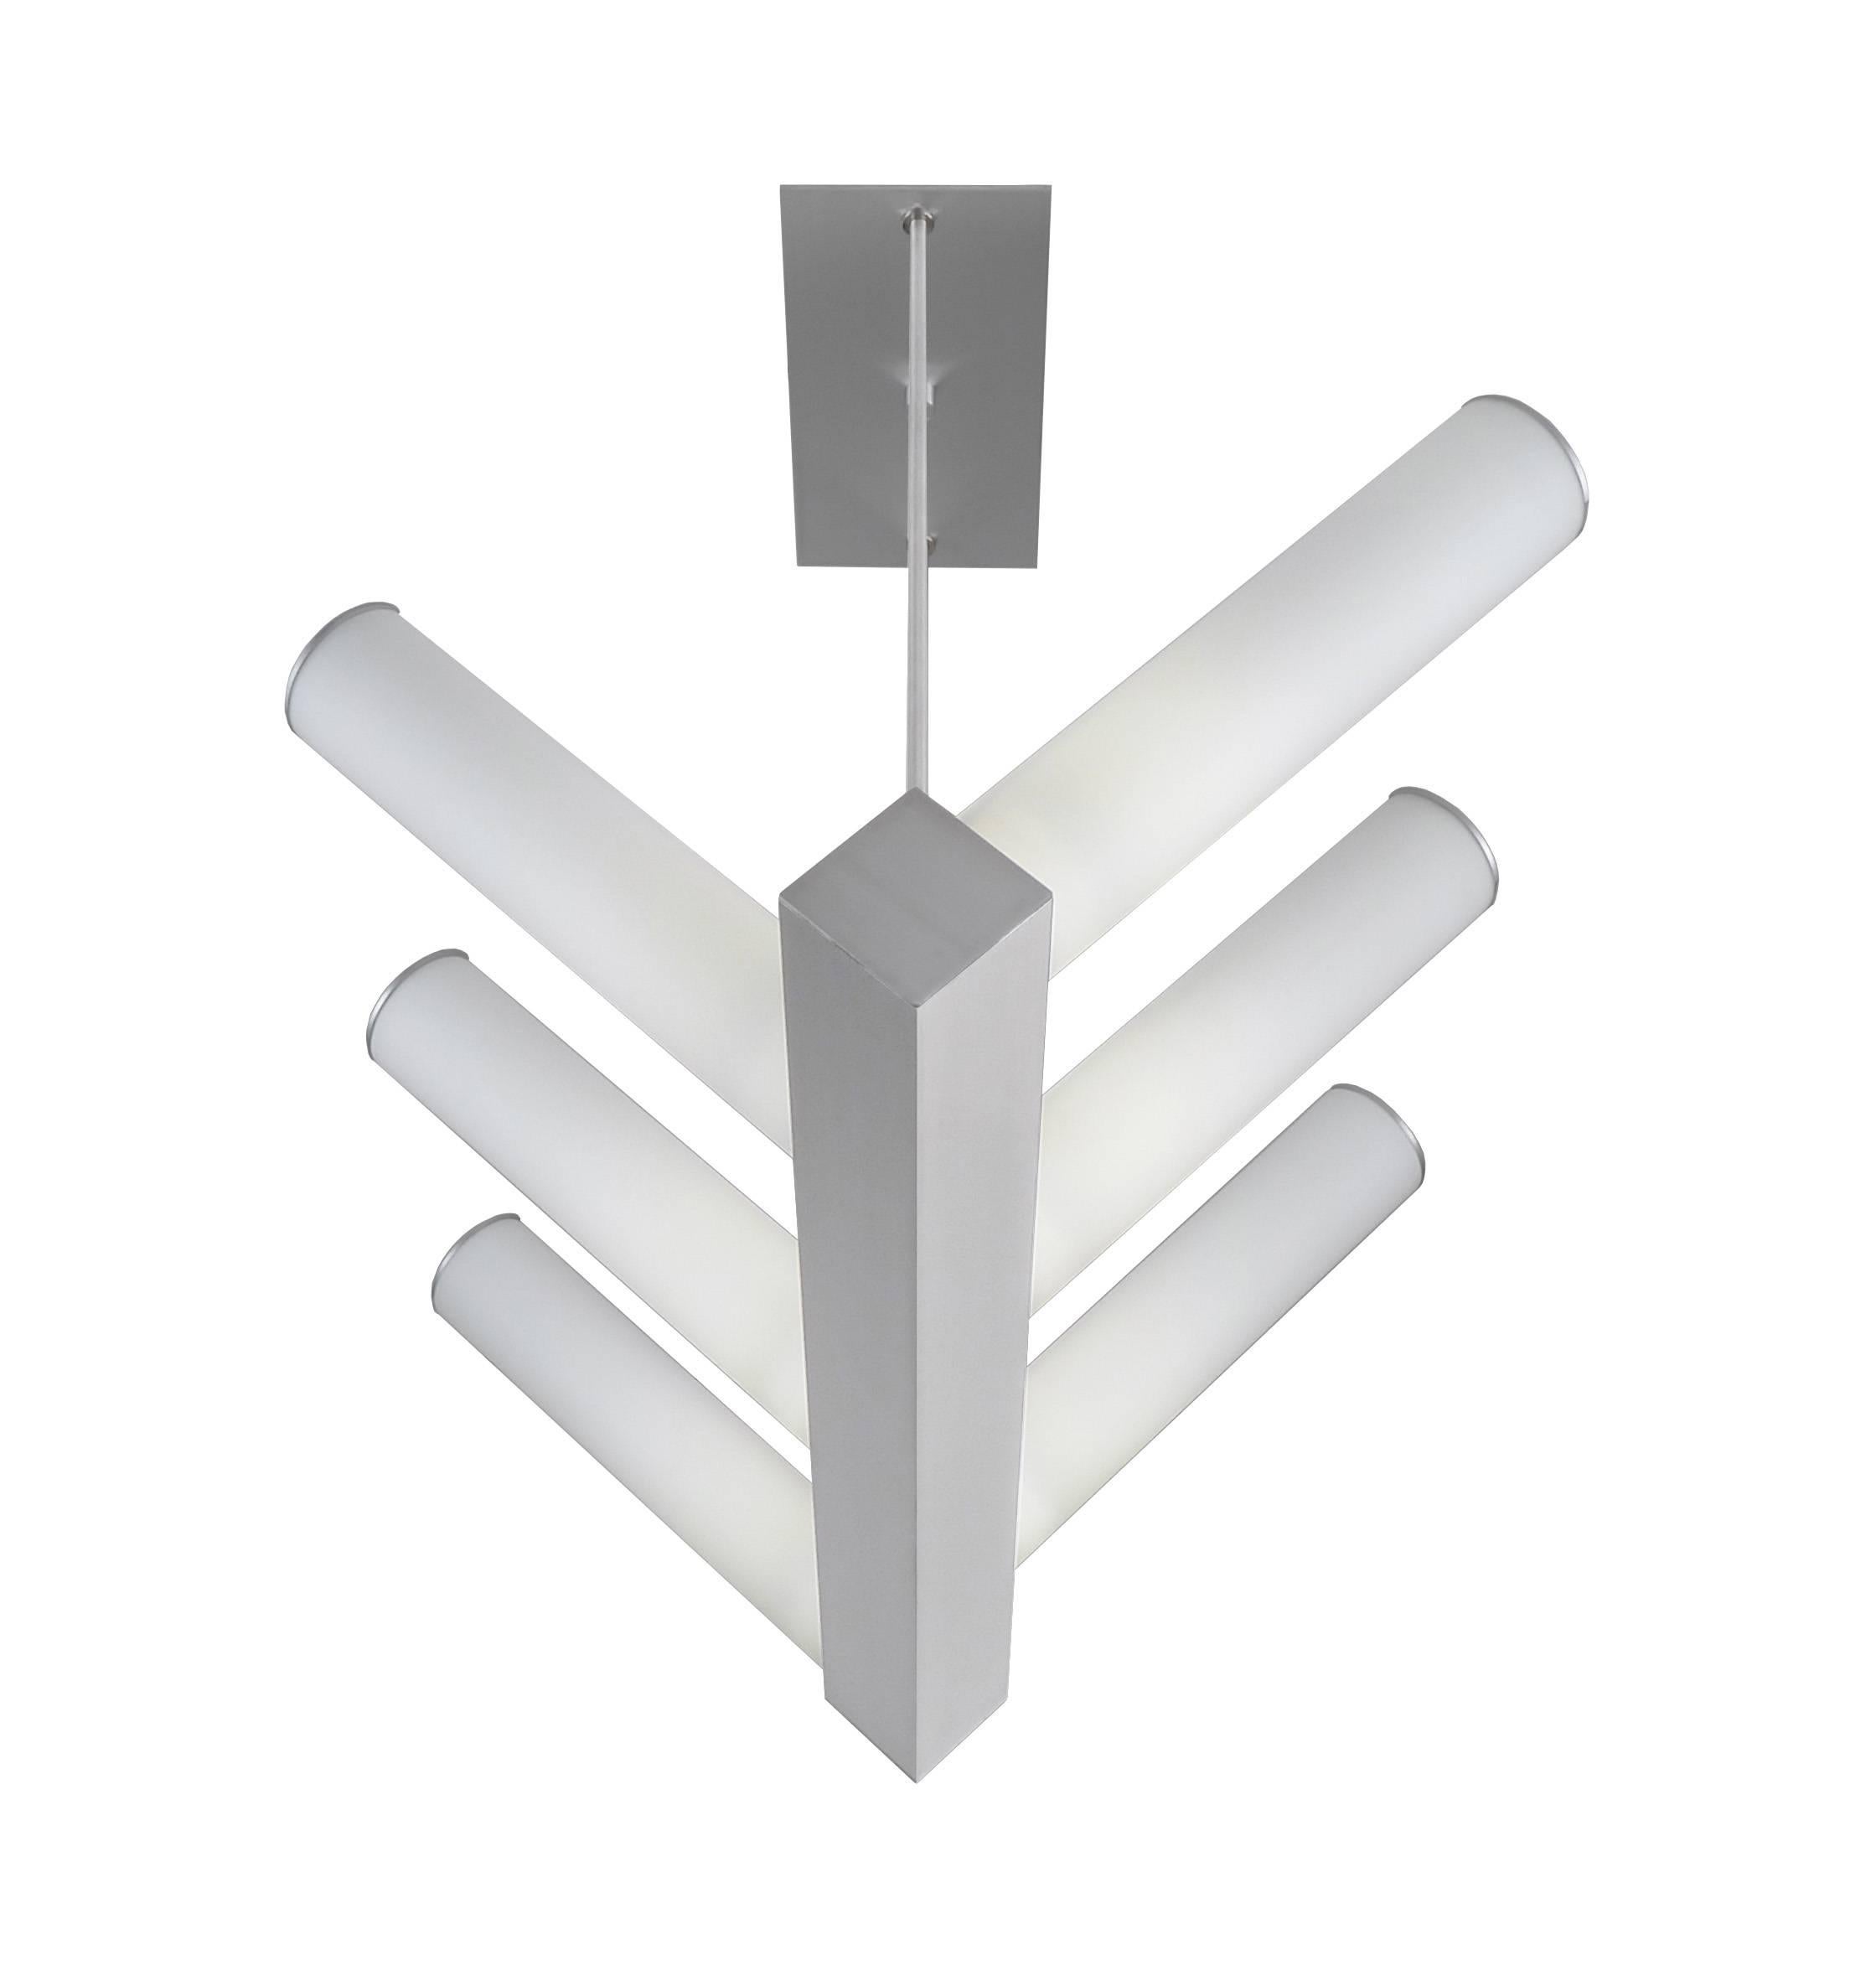 Bauhaus inspired V-Six LED pendant light with white glass cylinders. Measures: 30